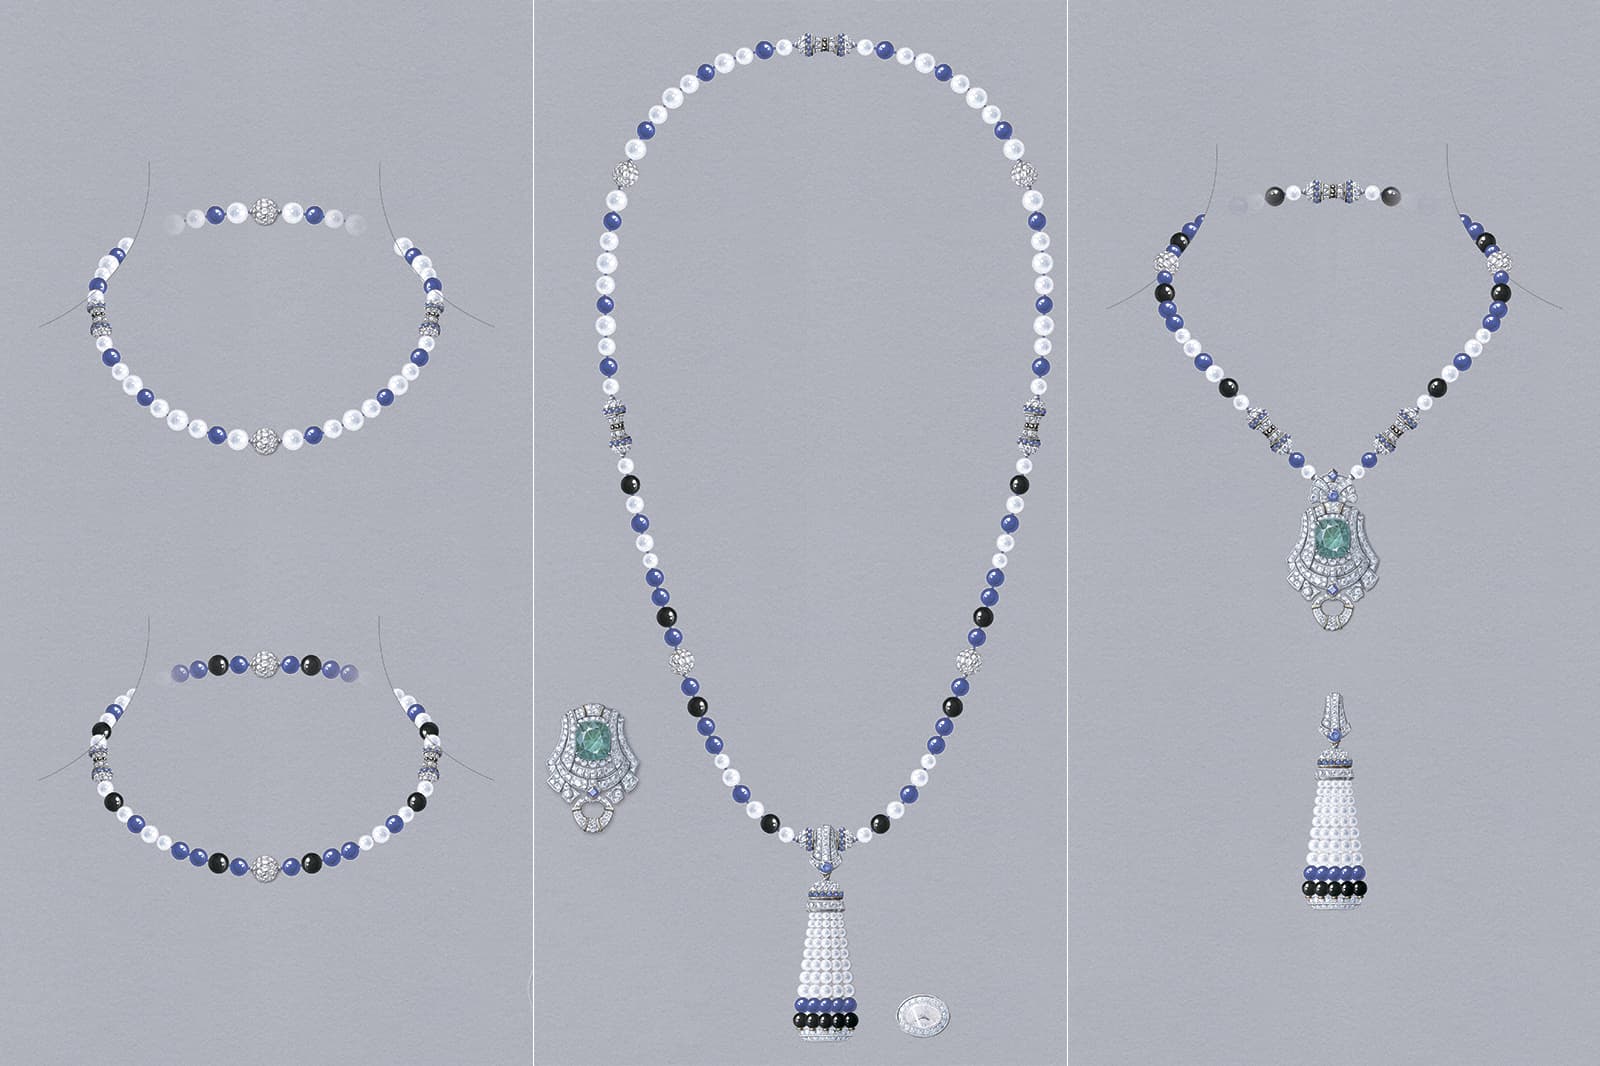 Drawings that demonstrate the transformations of the Van Cleef & Arpels Pompon Leila long necklace with sapphires, black spinels, onyx and lapis lazuli